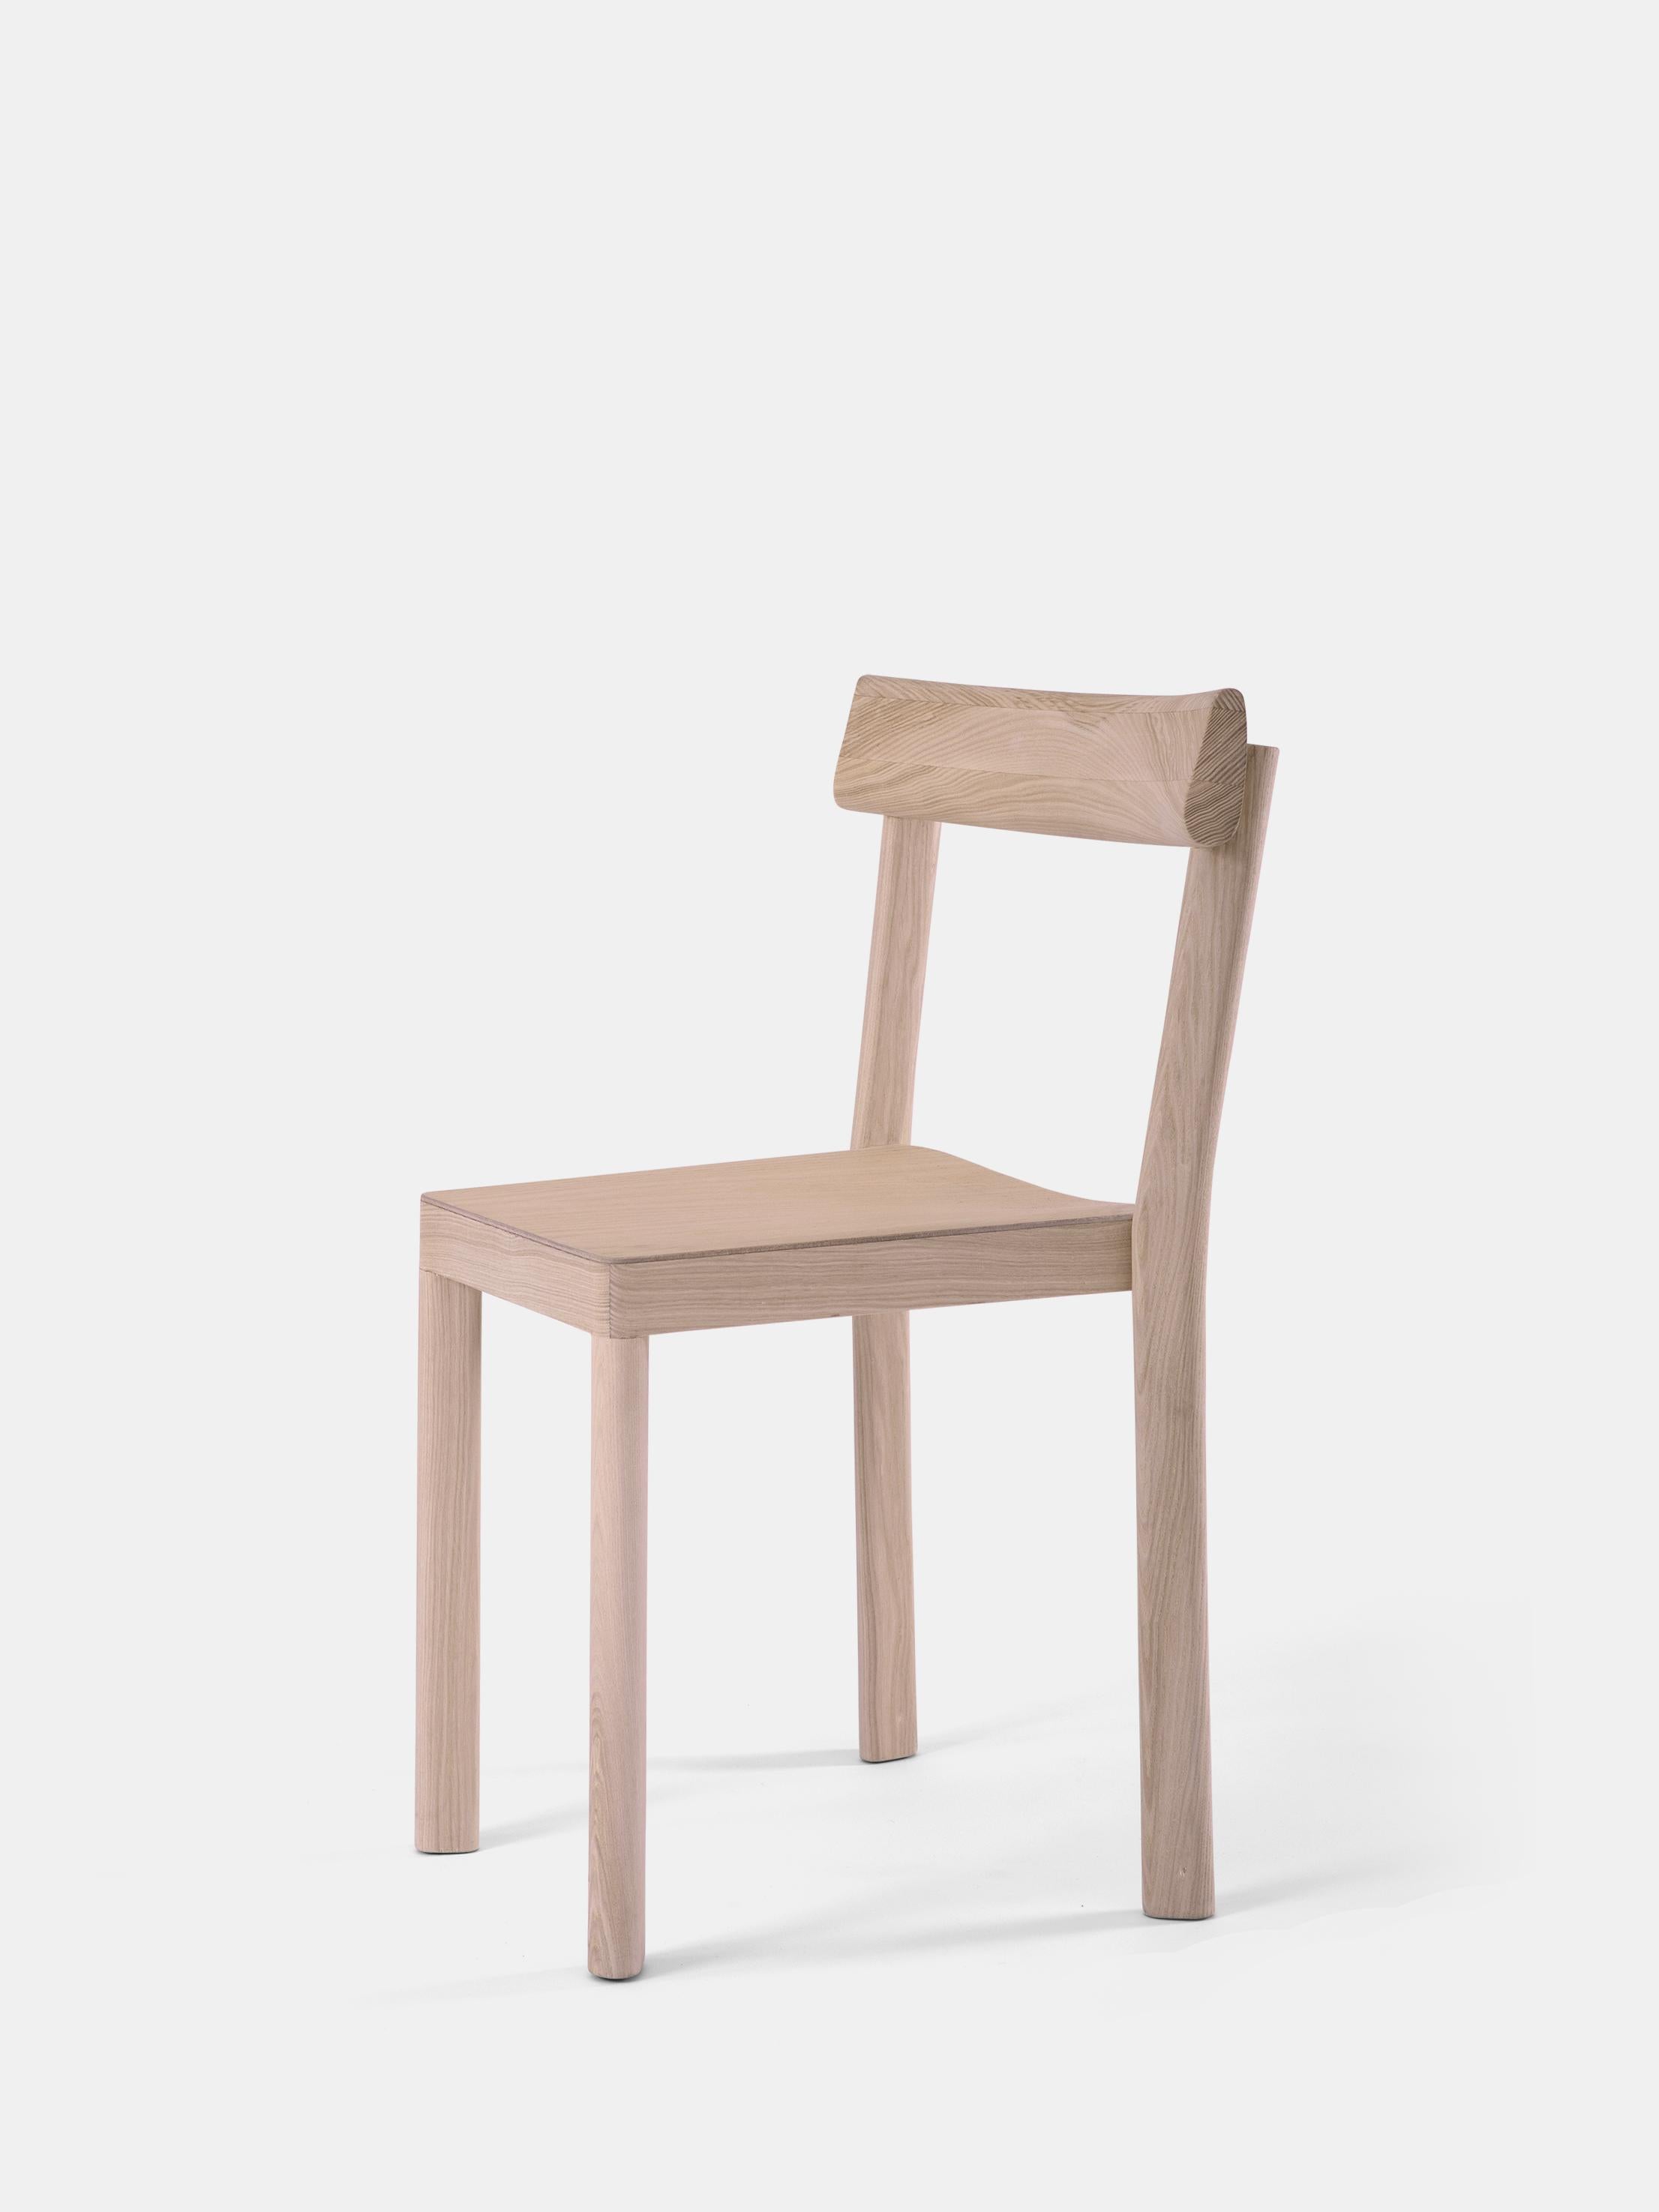 Set of 8 Galta Ash Chairs by Kann Design
Dimensions: D 43 x W 51 x H 80 cm.
Materials: Natural ash.
Available in other finishes.

With the Galta, SCMP Design Office rethinks the classic bistro chair. The result is the epitome of lightness in terms